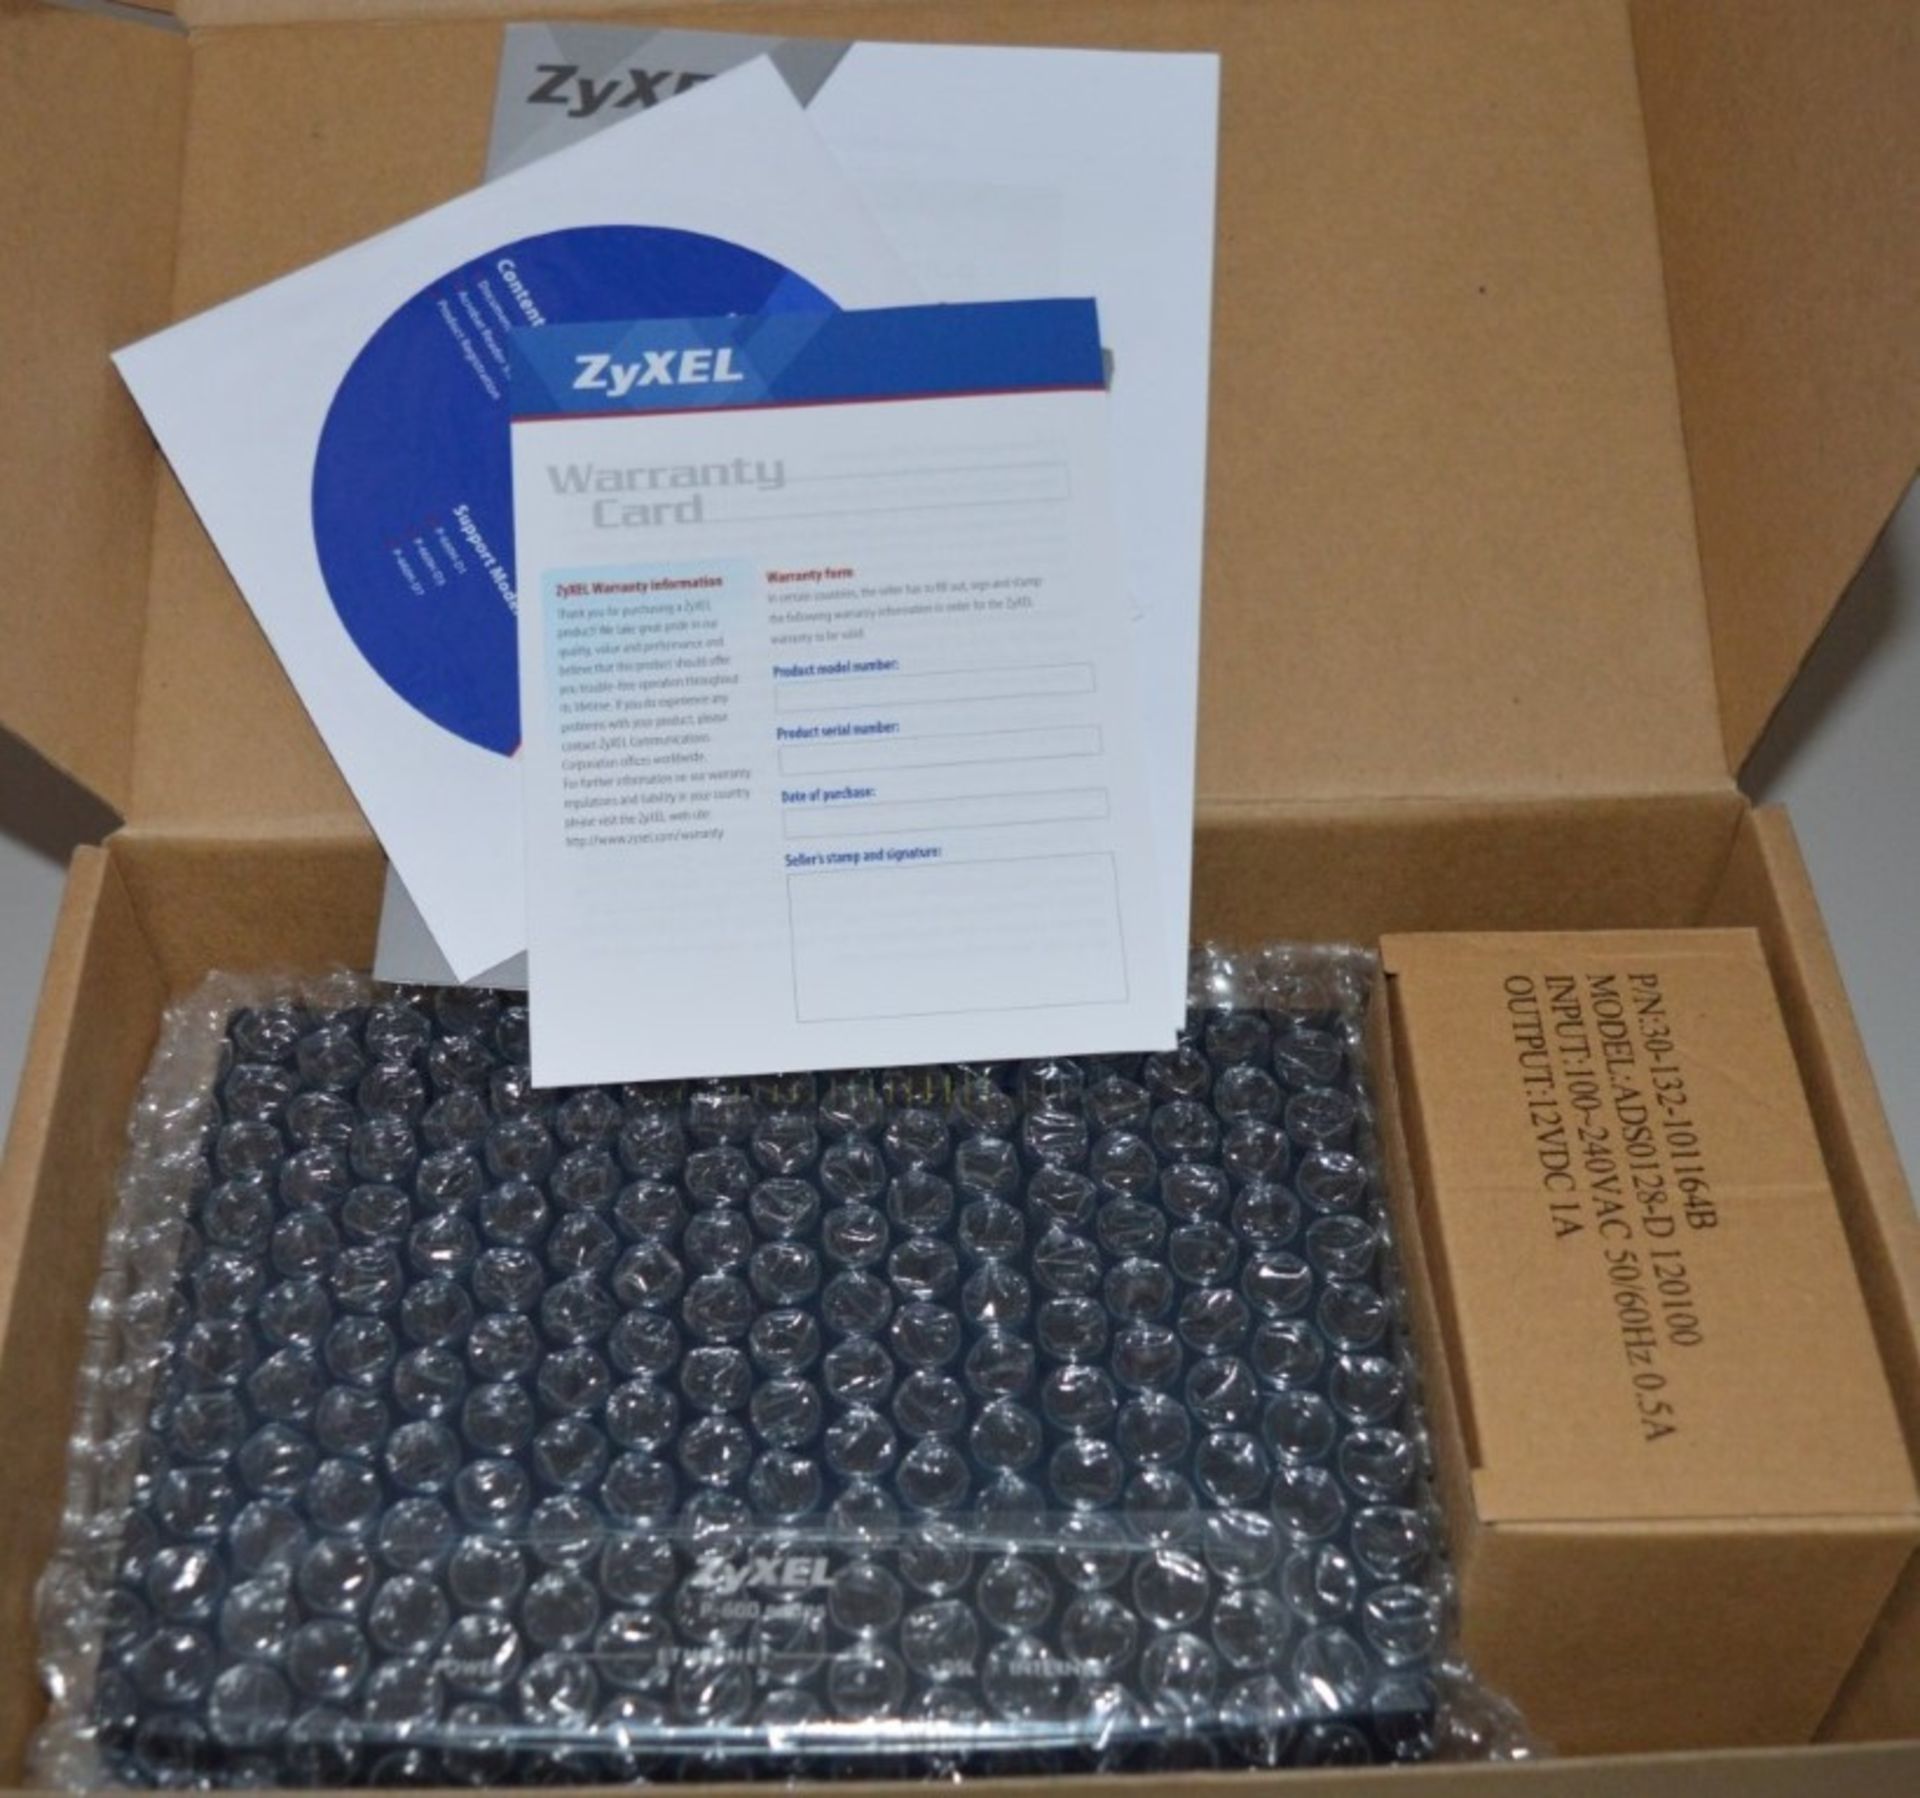 1 x Zyxel Ultra High Speed ASL2+ Gateway For SOHO Networks Router - Model P-660H - New and Sealed - - Image 3 of 3